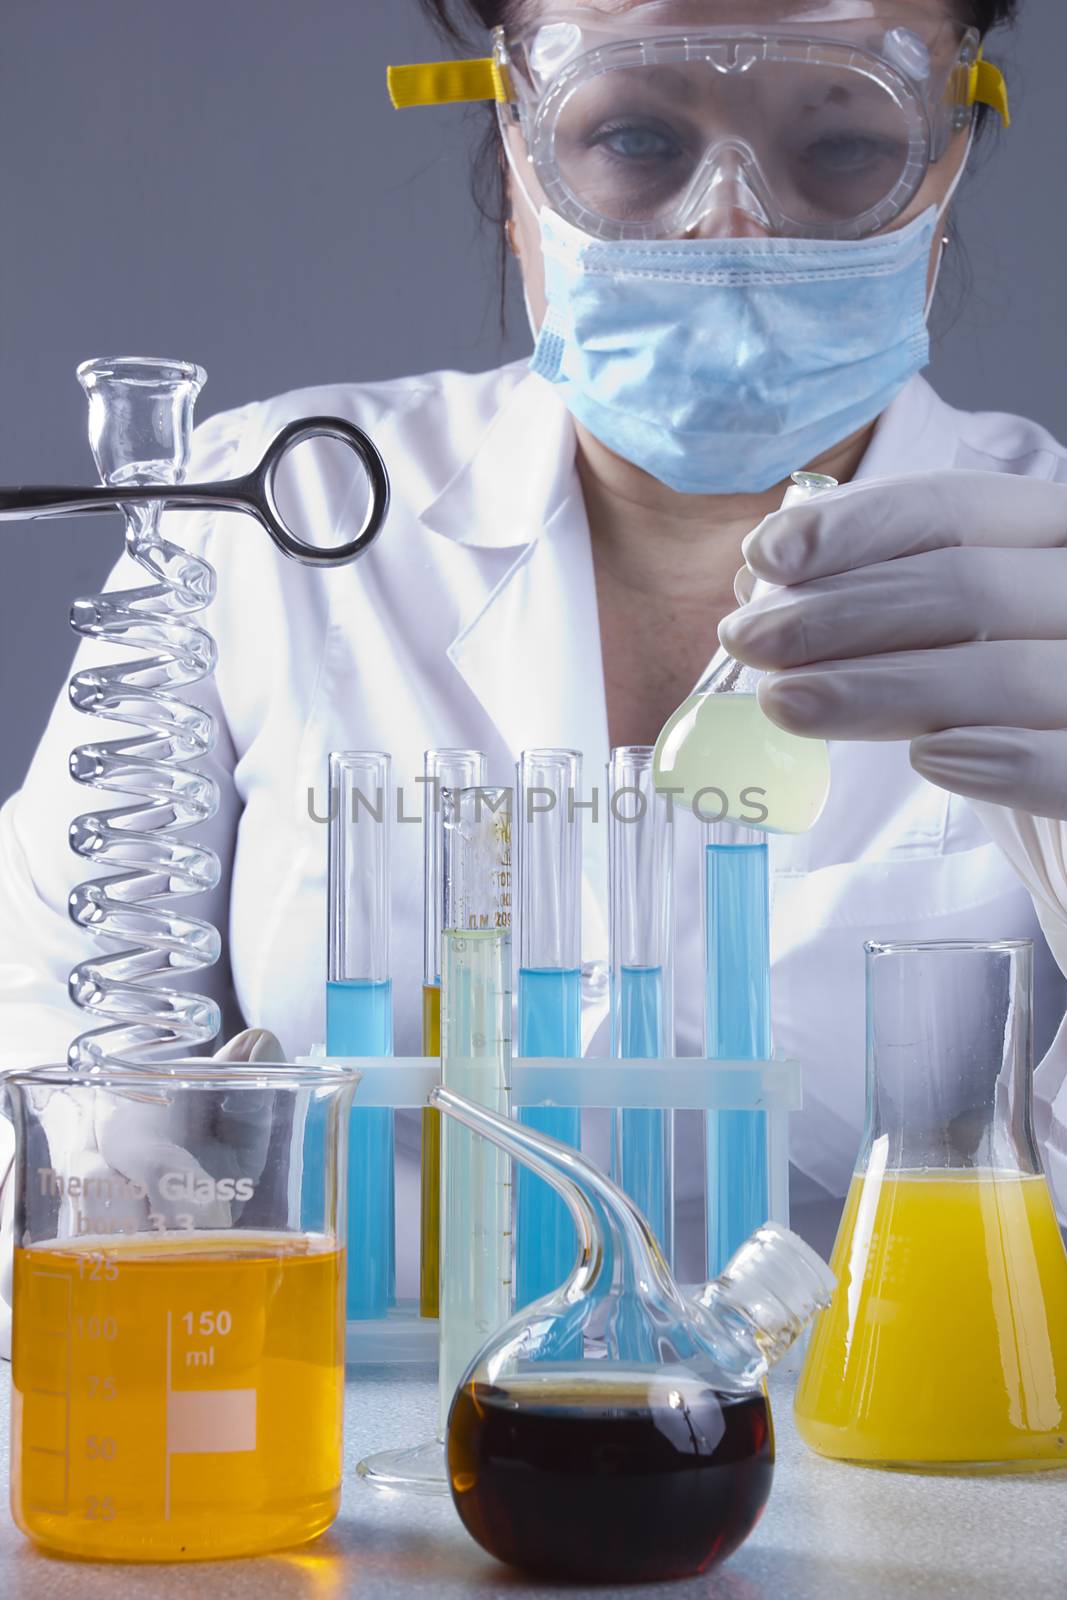 Adult lab assistant works in the laboratory